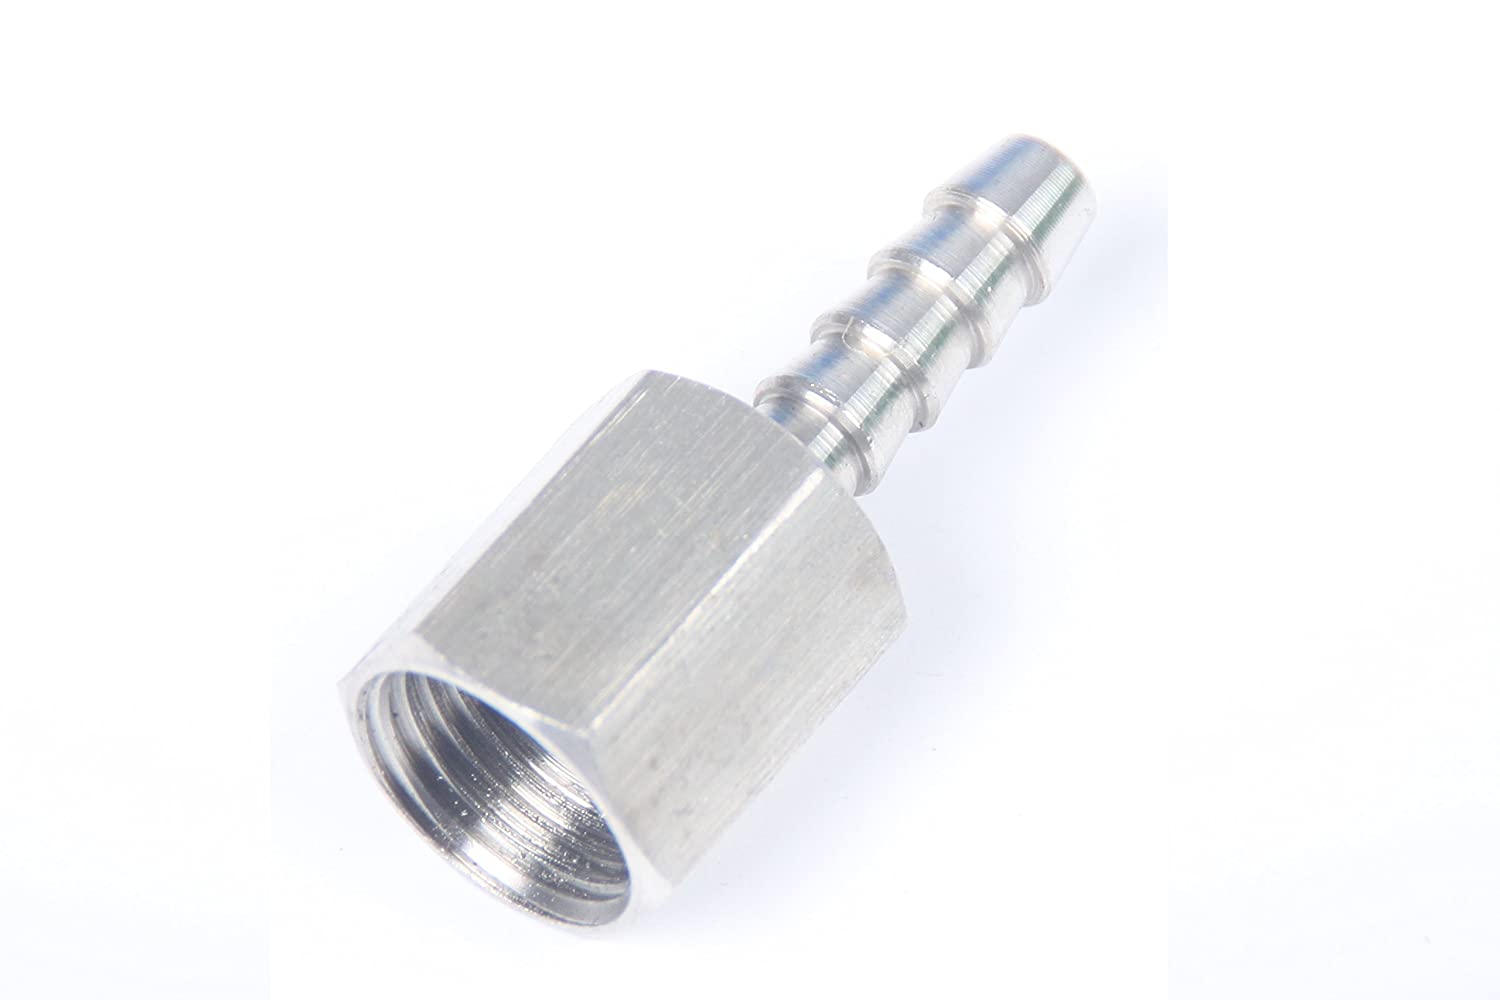 LTWFITTING Bar Production Stainless Steel 316 Barb Fitting Coupler 1/8 Inch Hose ID x 1/8 Inch Female NPT Air Fuel Water (Pack of 5)